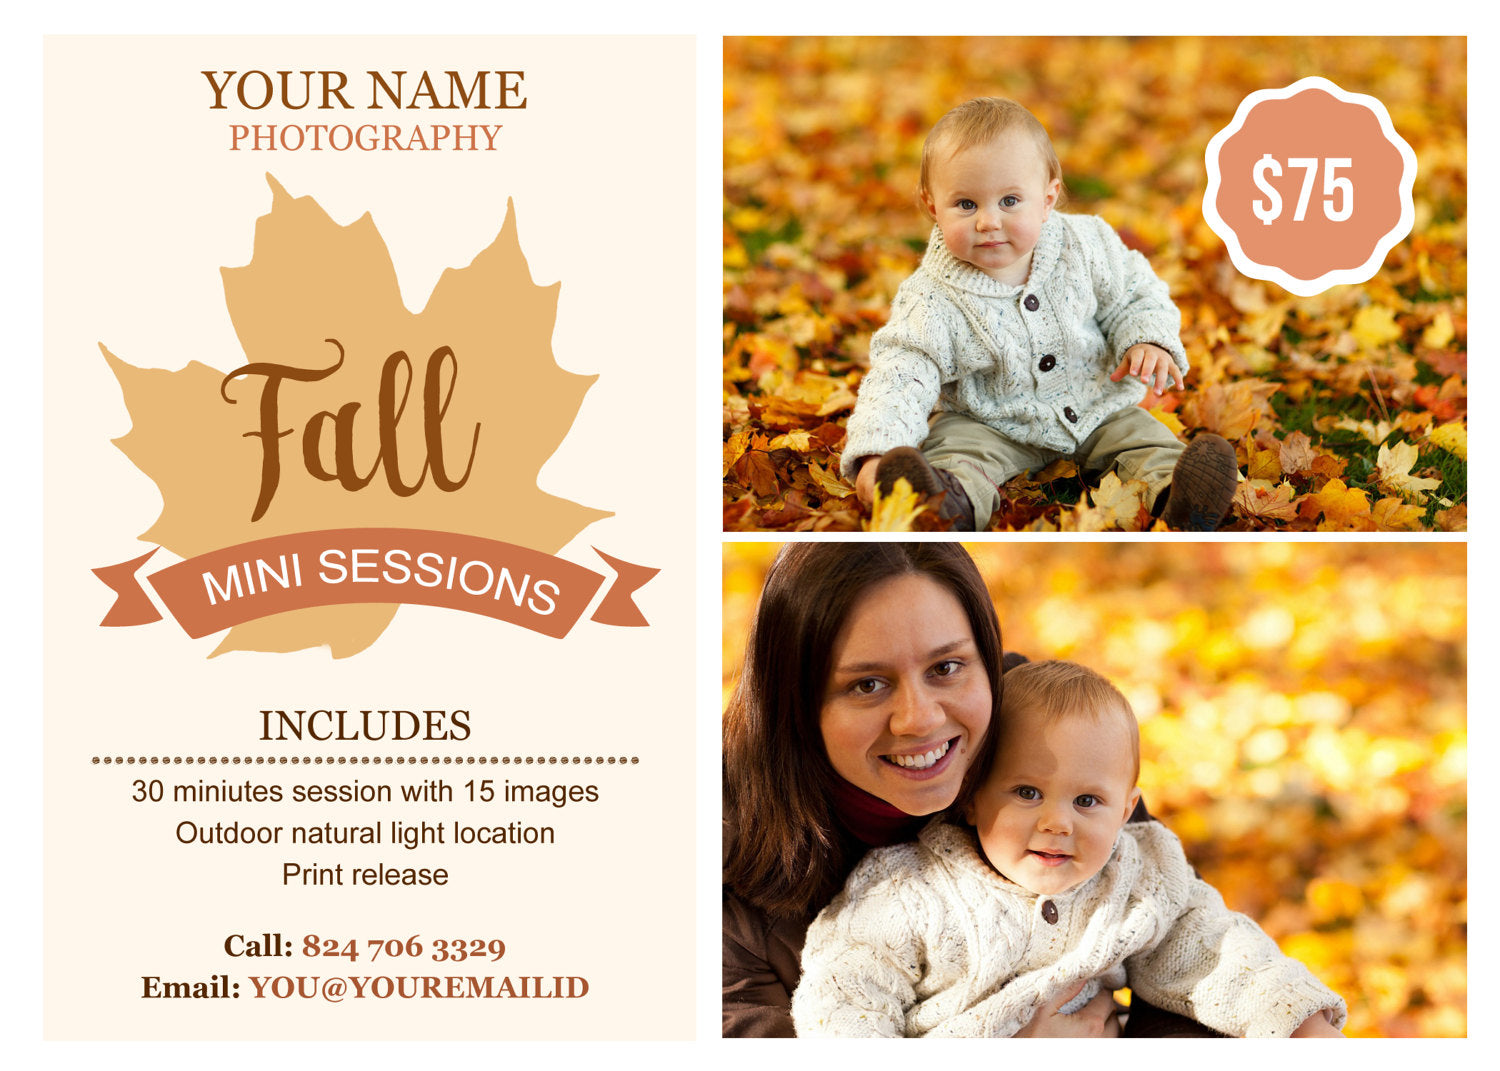 Fall marketing template - Photography mini session template - Autumn mini session - Photography marketing board - INSTANT DOWNLOAD